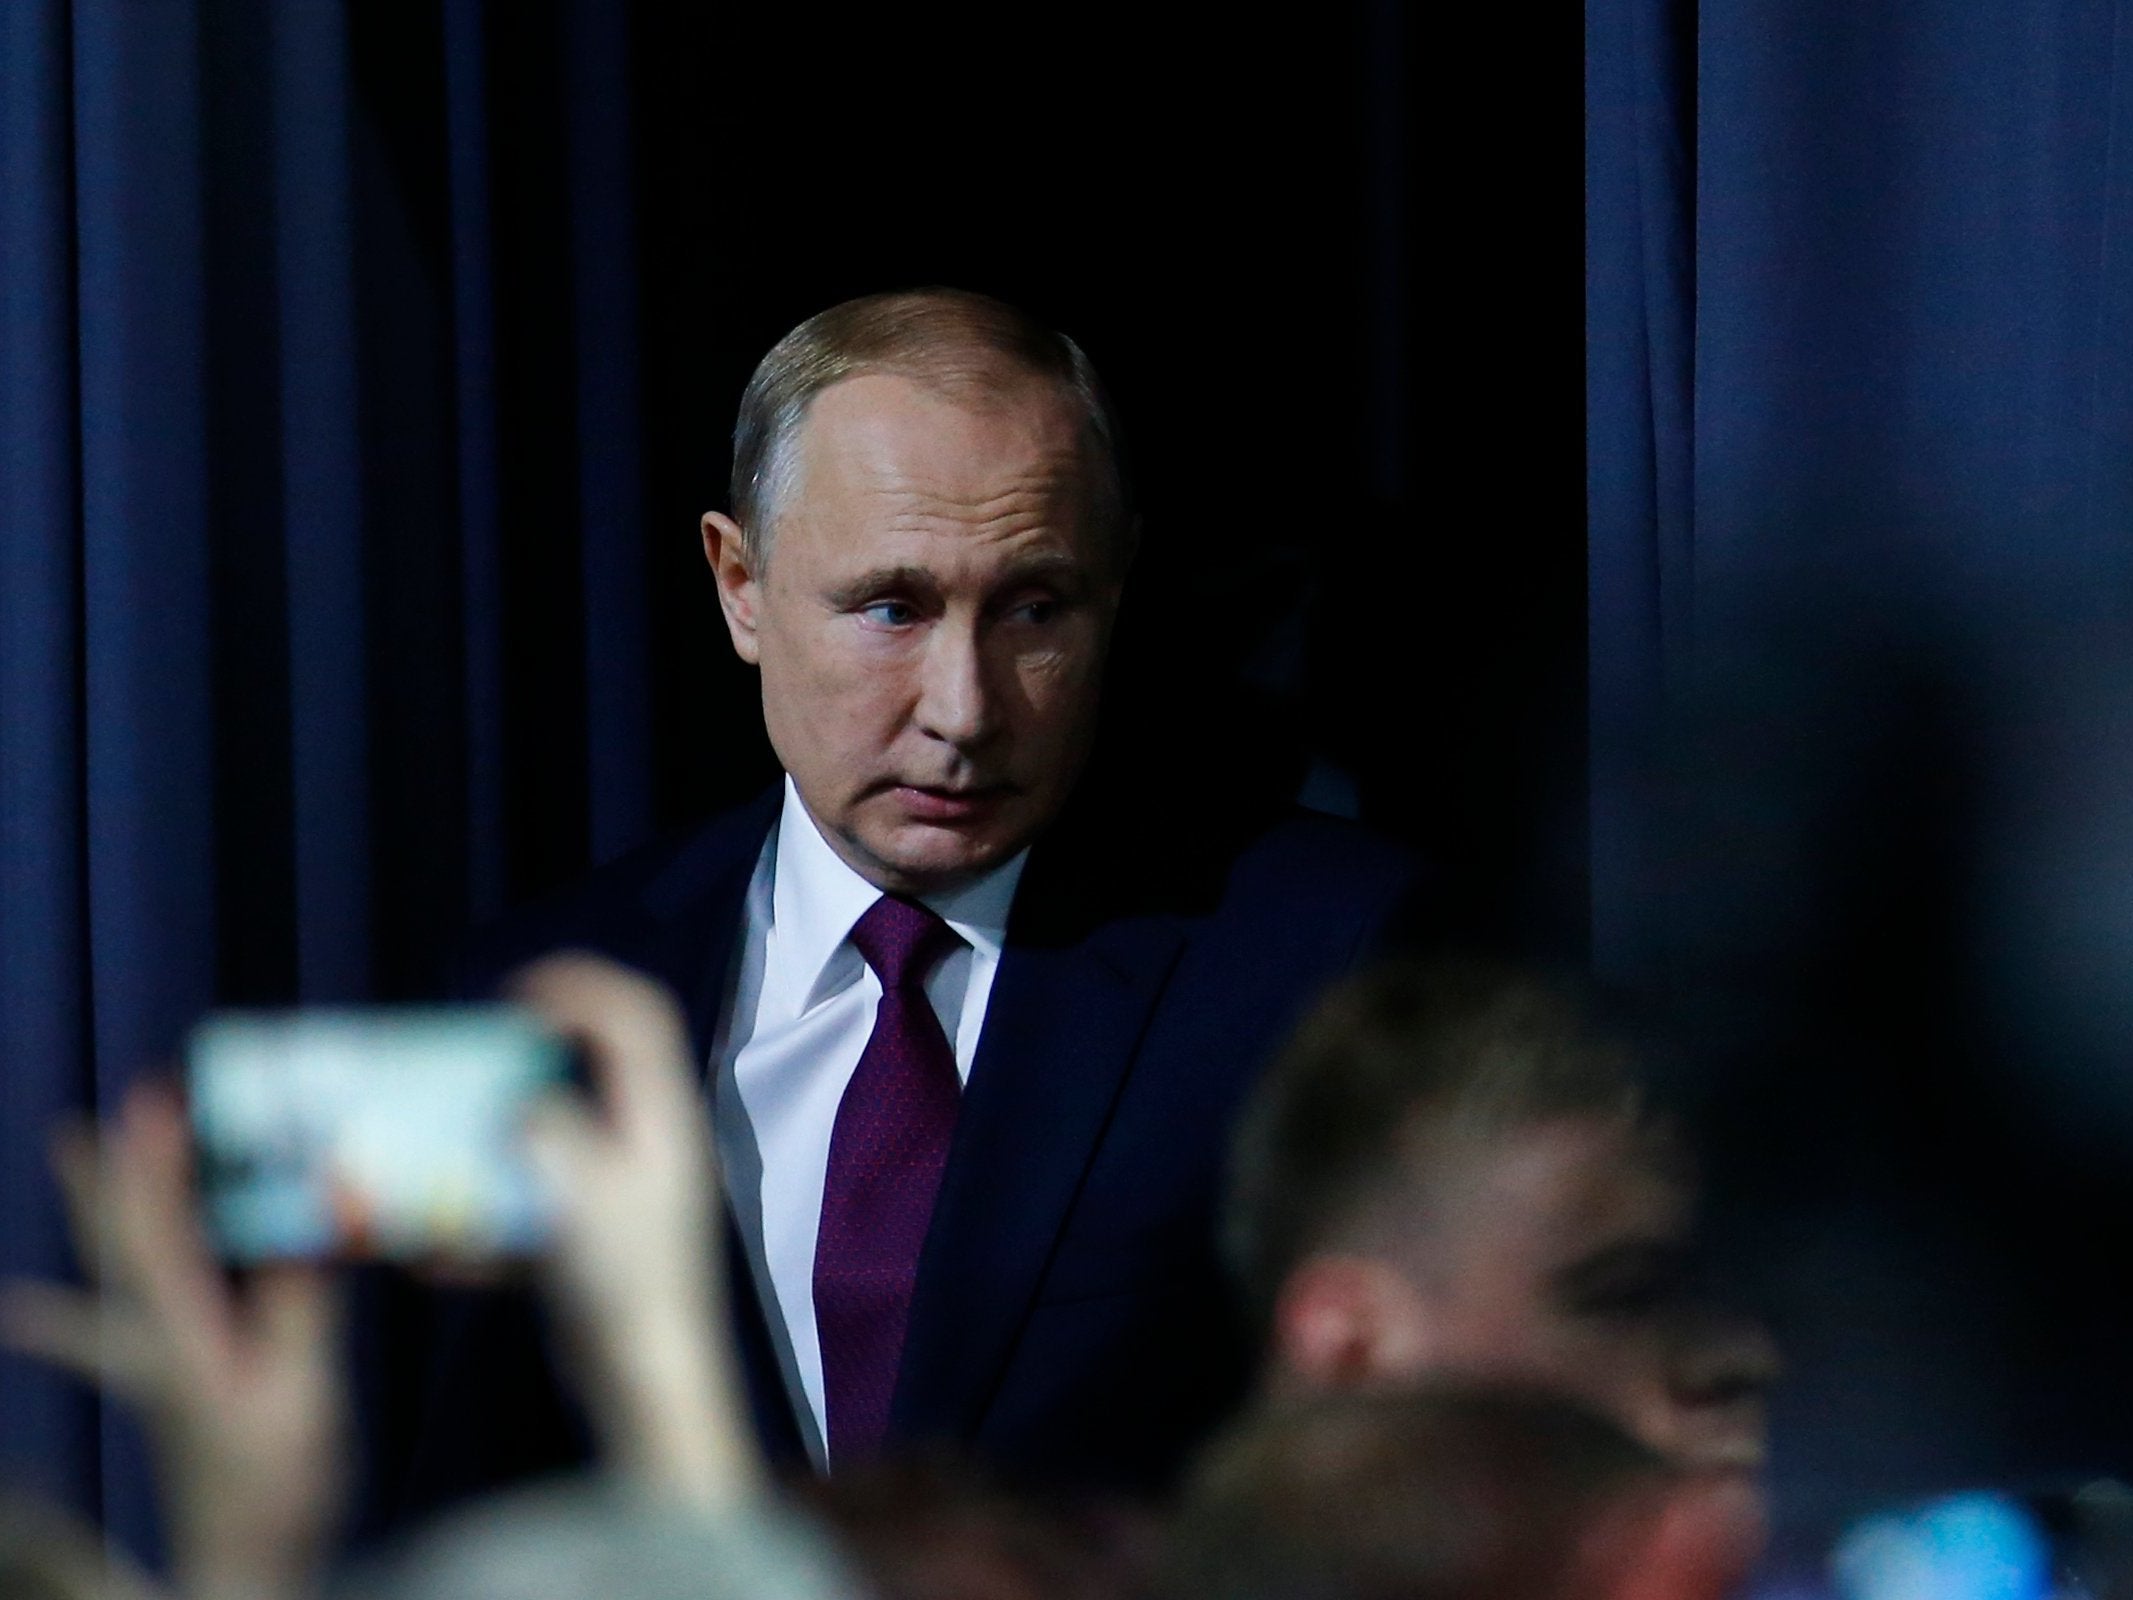 Putin’s Russia will continue to position itself as a disruptive force